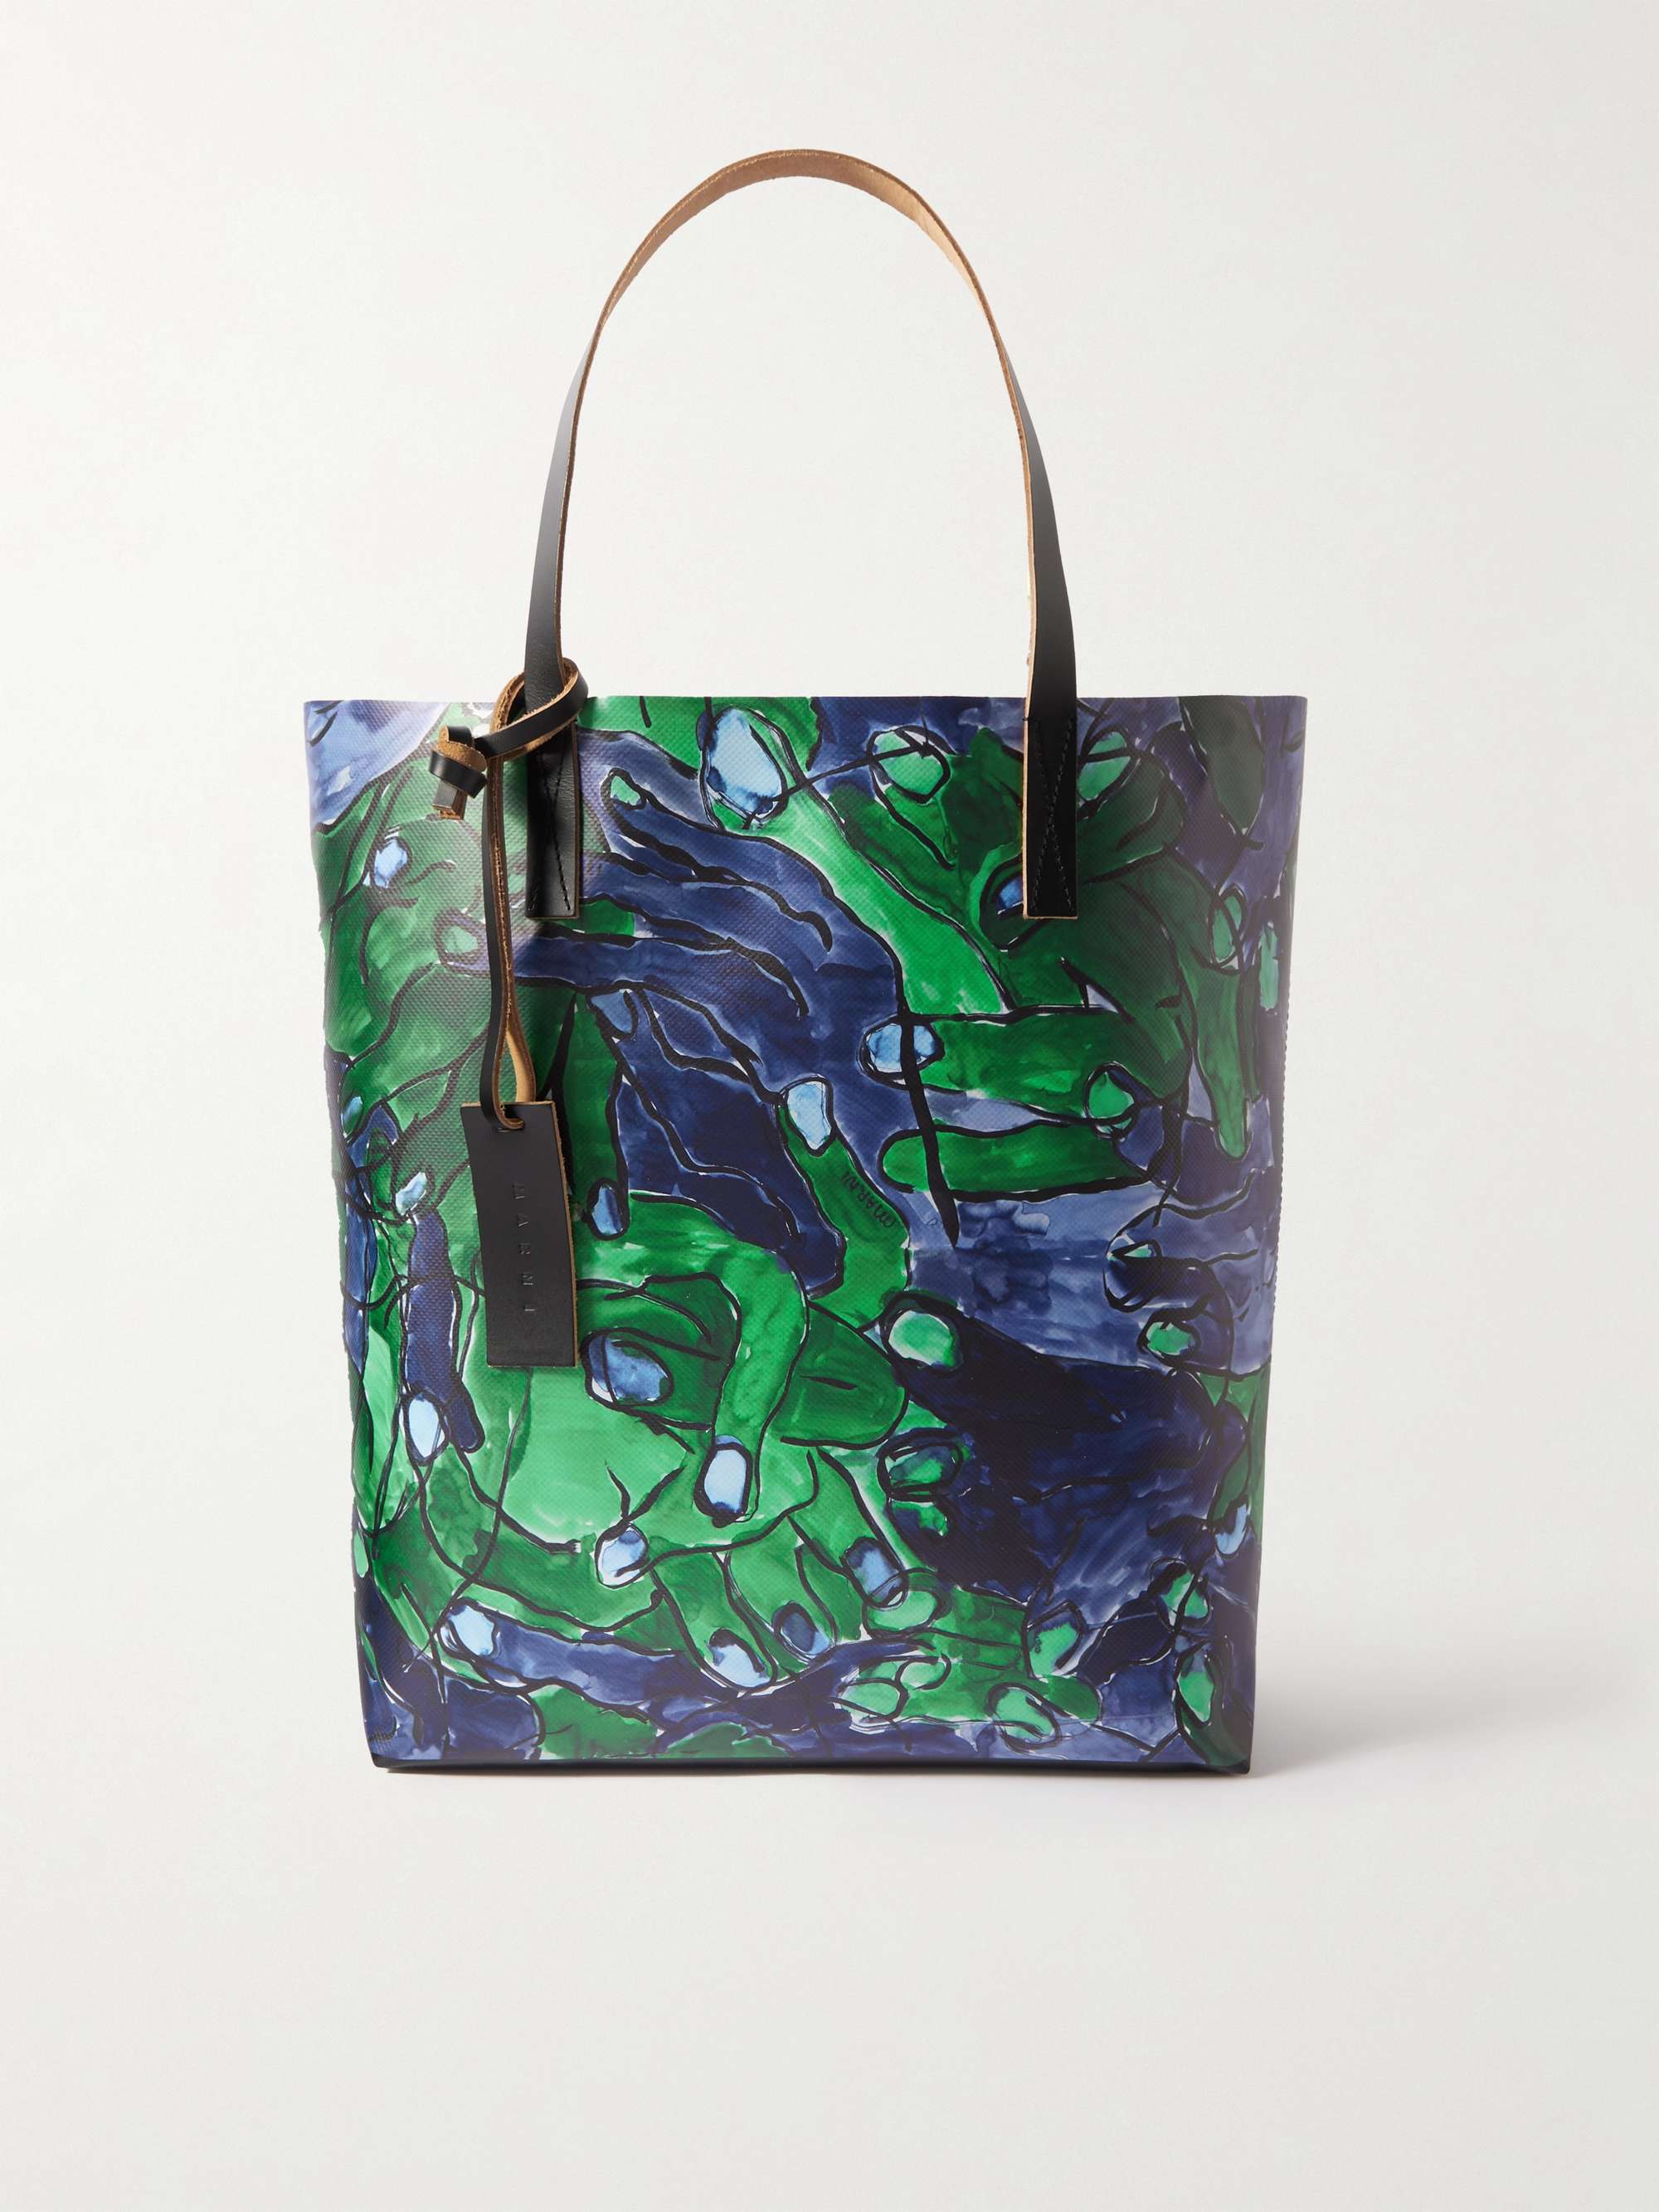 MARNI North/South Leather-Trimmed Printed Shell Tote Bag | MR PORTER